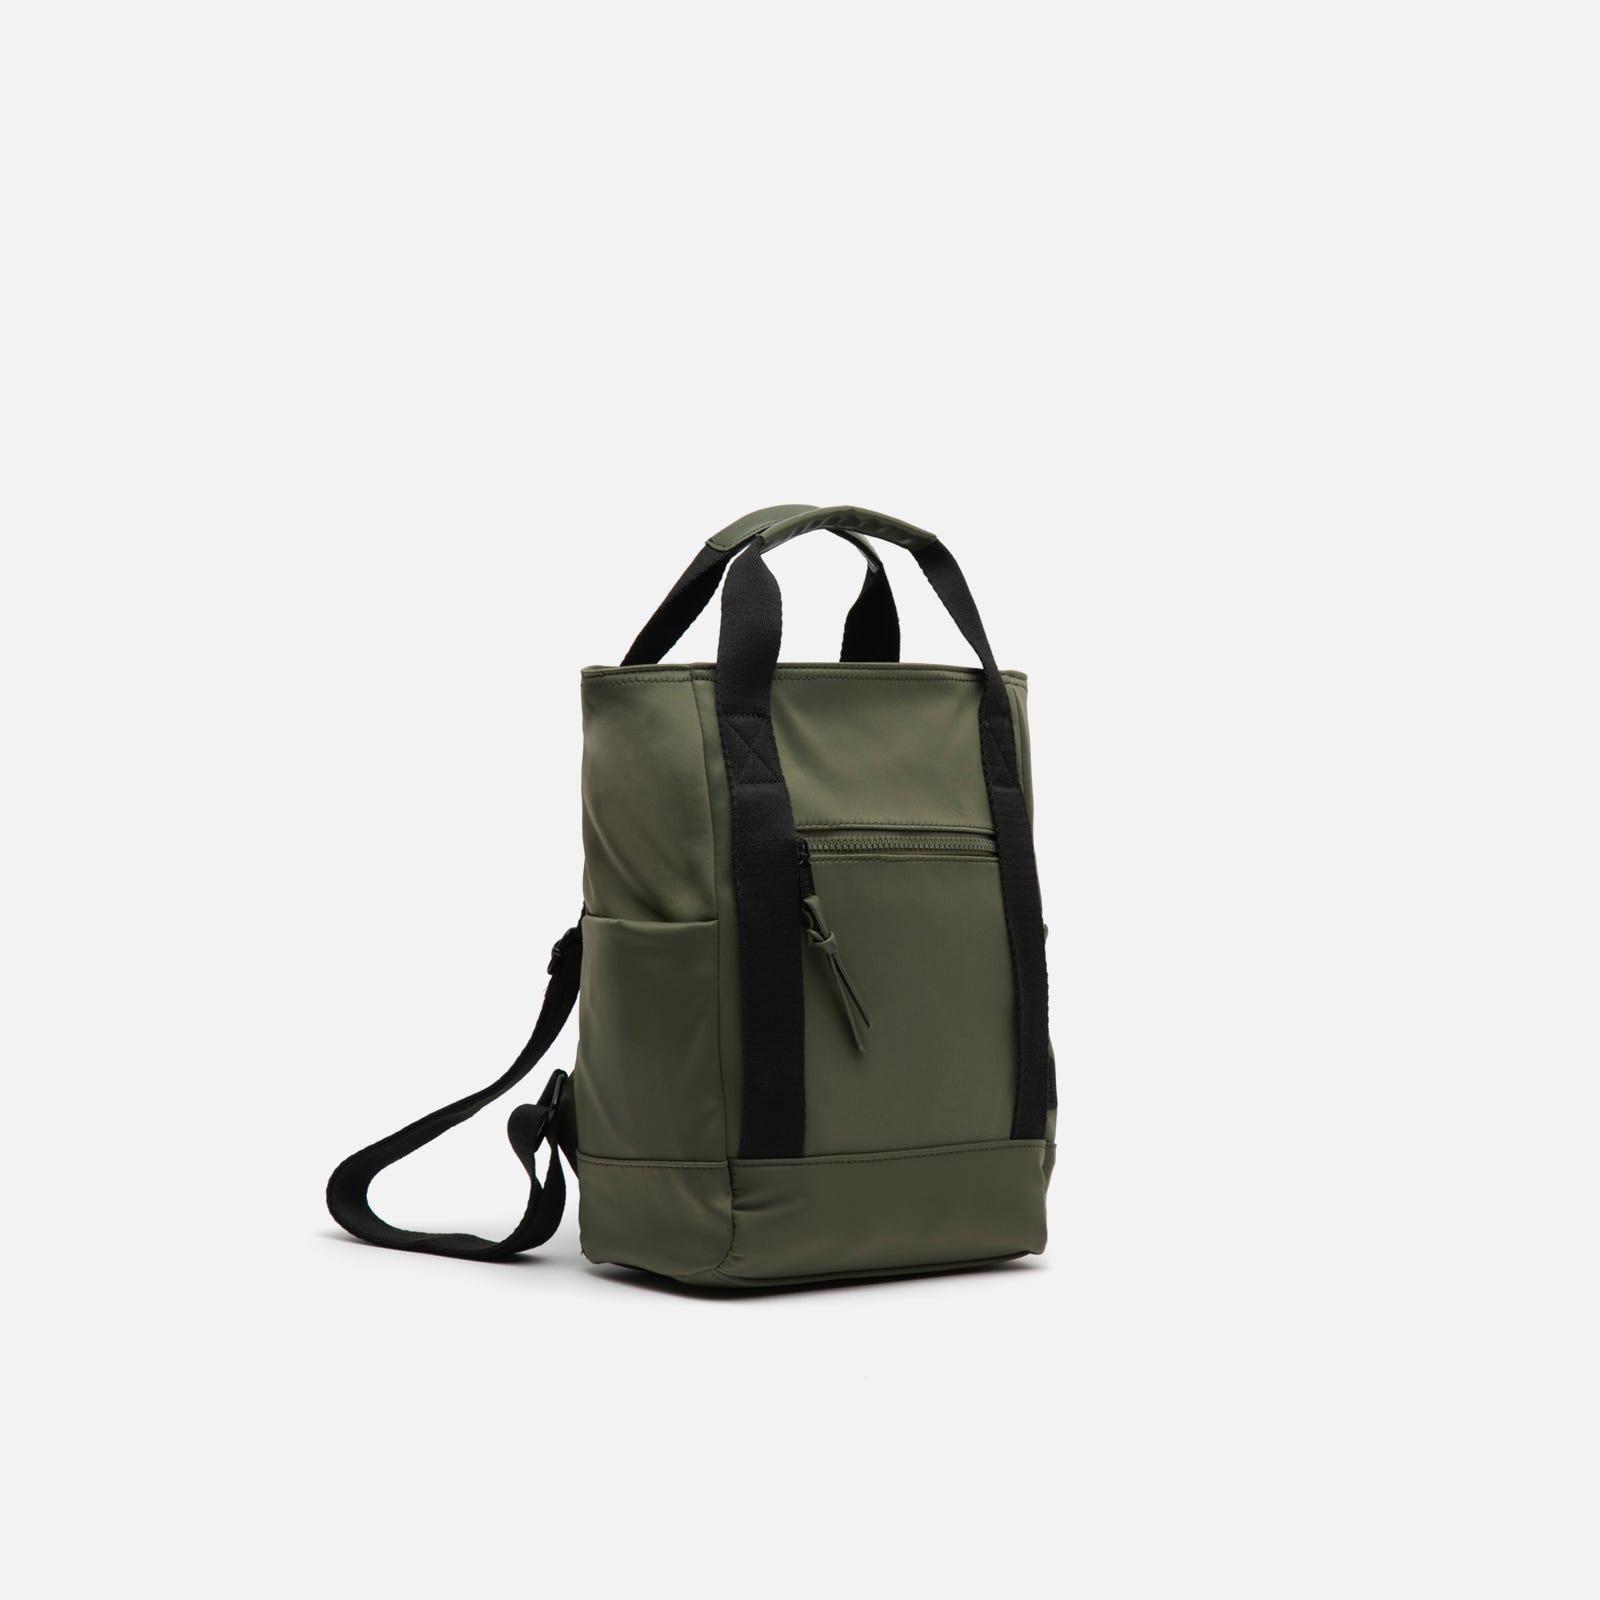 Small nylon backpack with carry handle